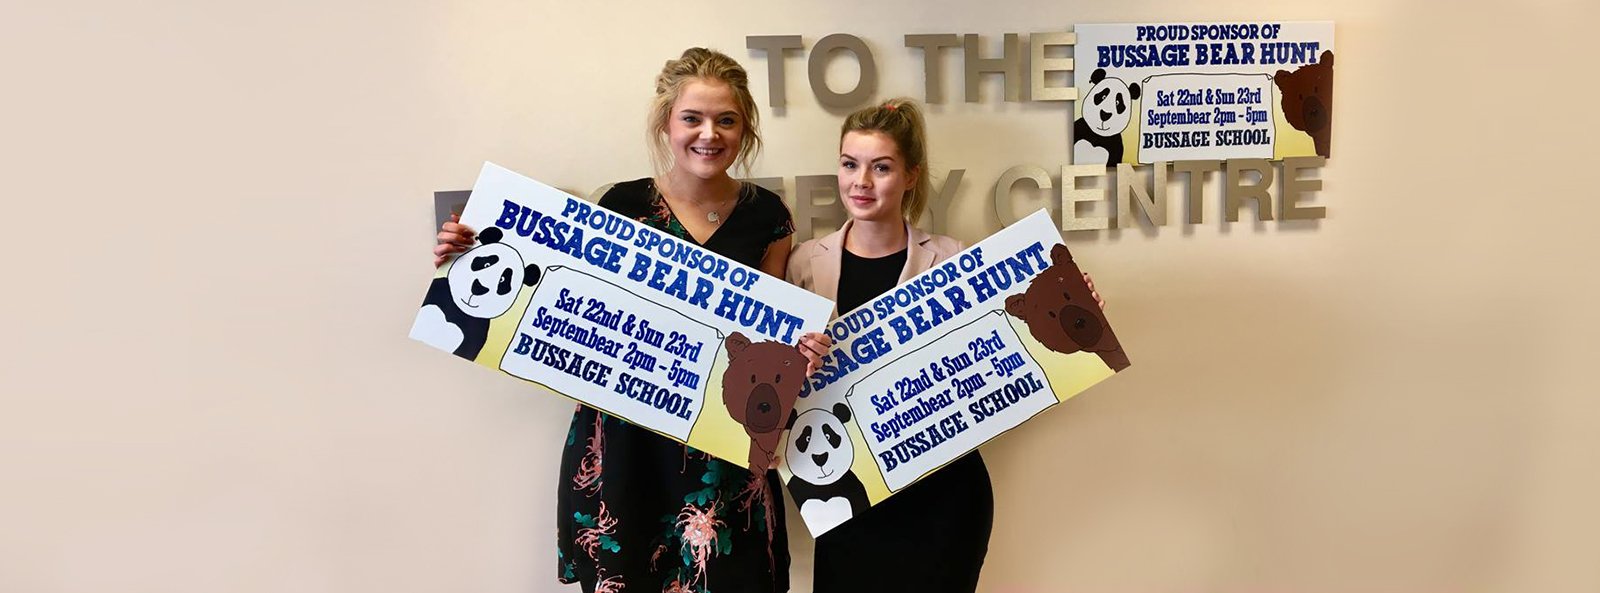 Jessica Pearce and Ellen Trueman, Sales Negotiators in The Property Centre's Stroud branch holding the Bussage Bear Hunt sold boards